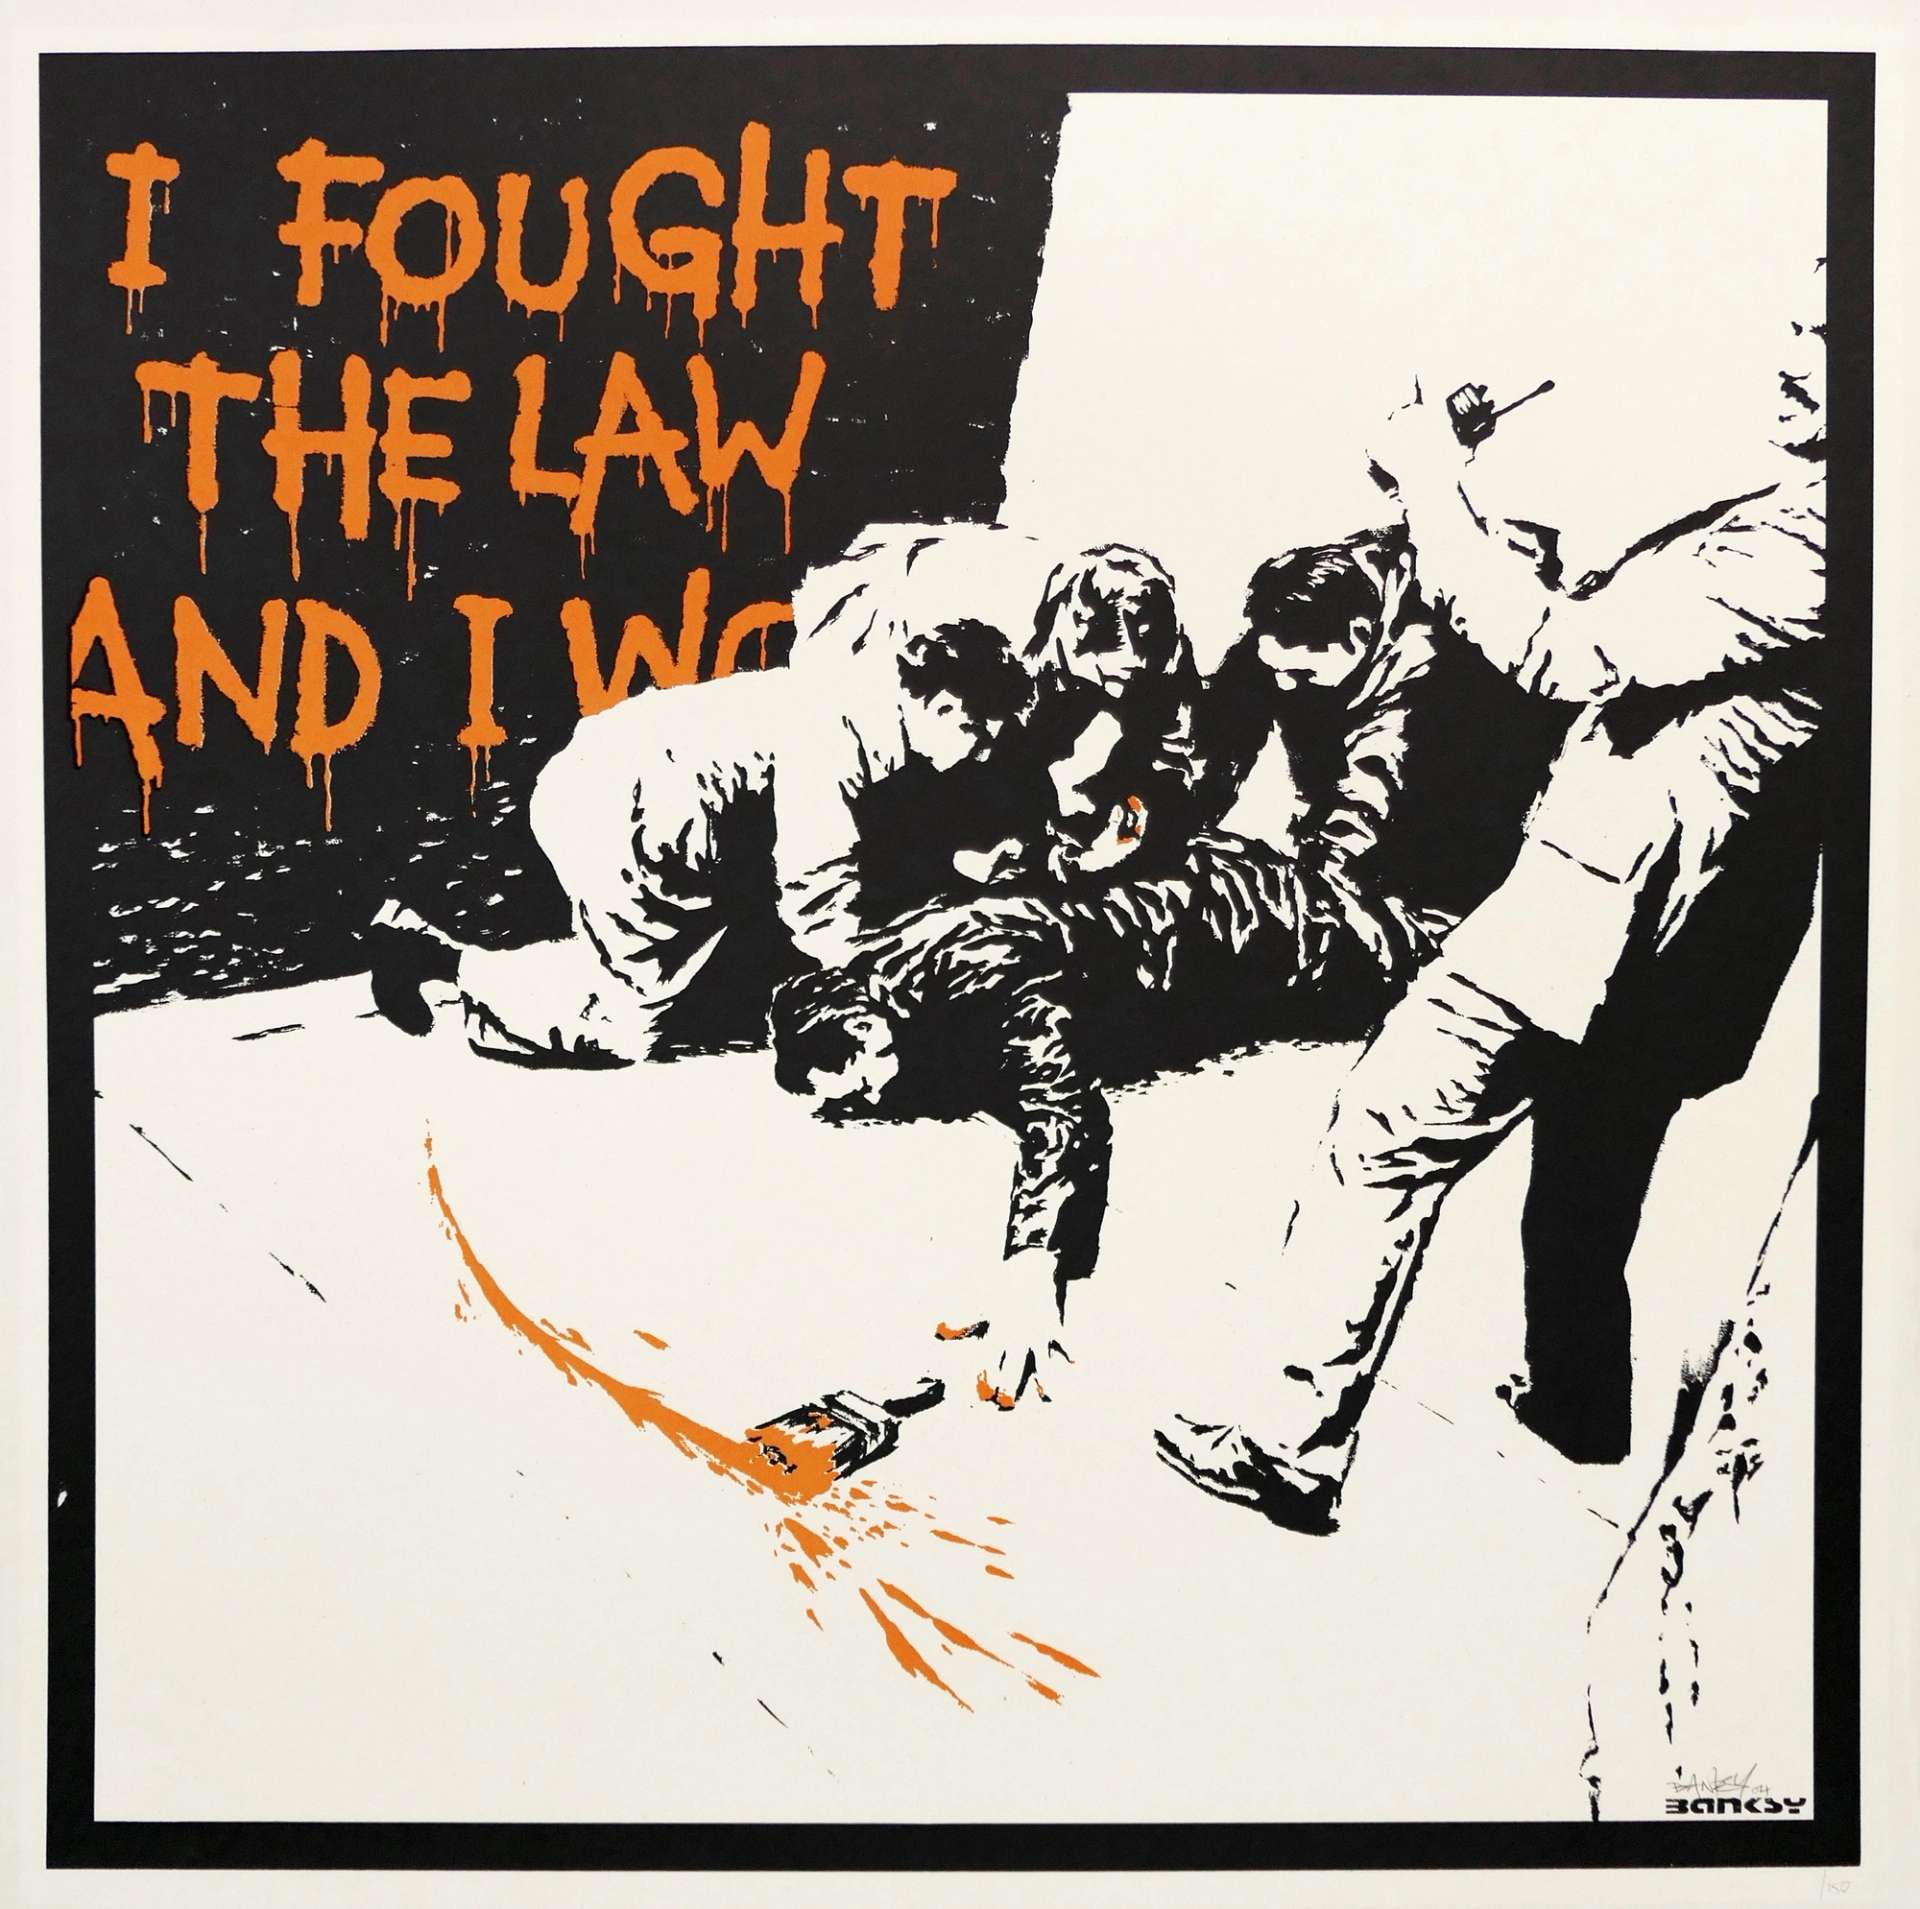 F**k the Police: The Theme of Disorder & Authority in Banksy’s Prints